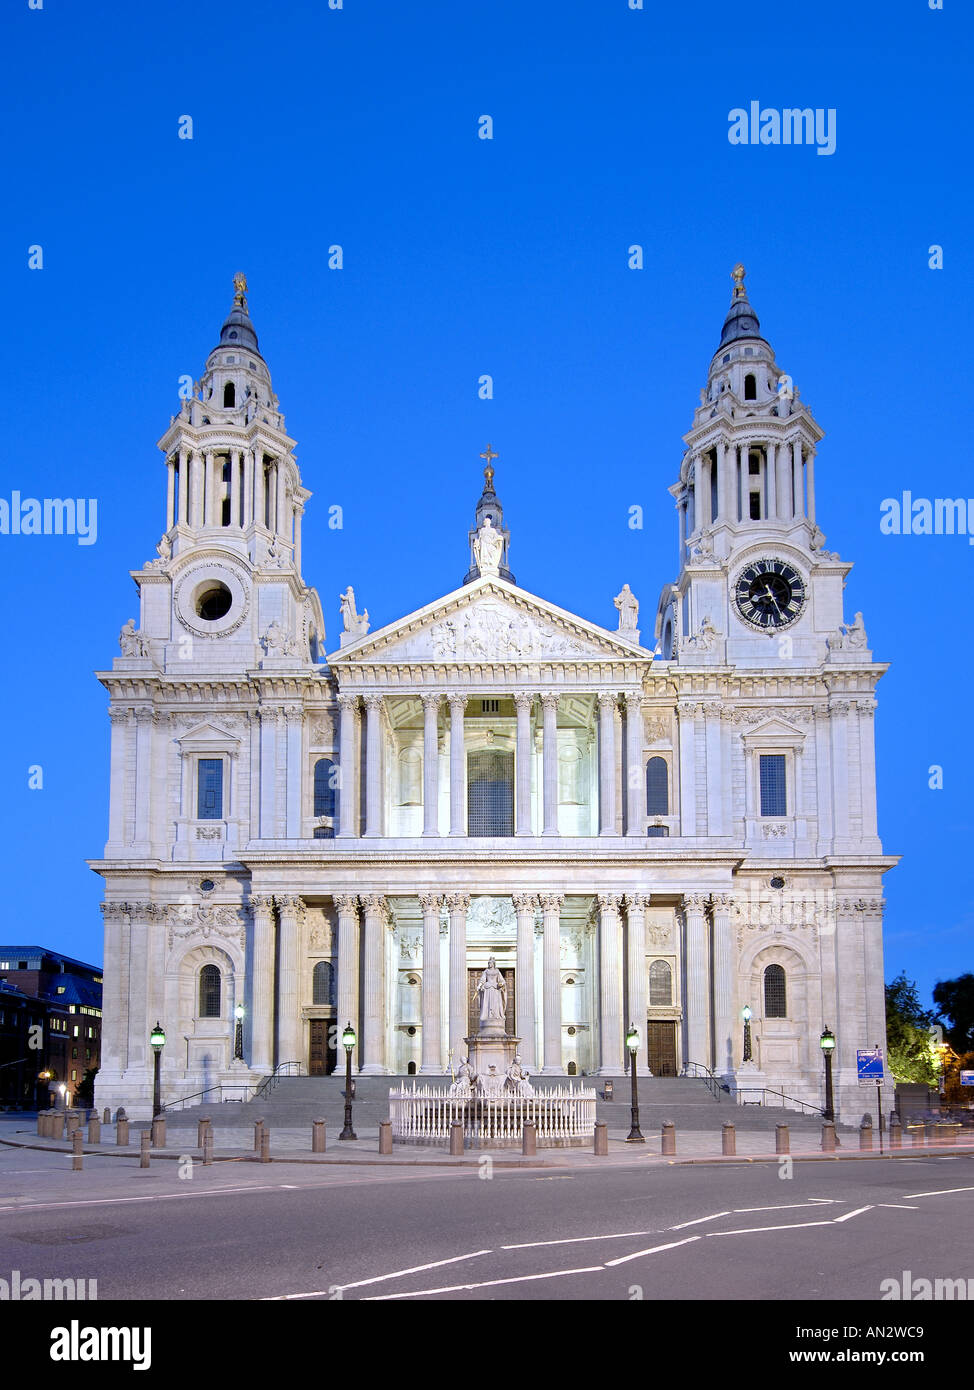 The front entrance and main facade of St Paul's cathedral in London at dusk. Stock Photo